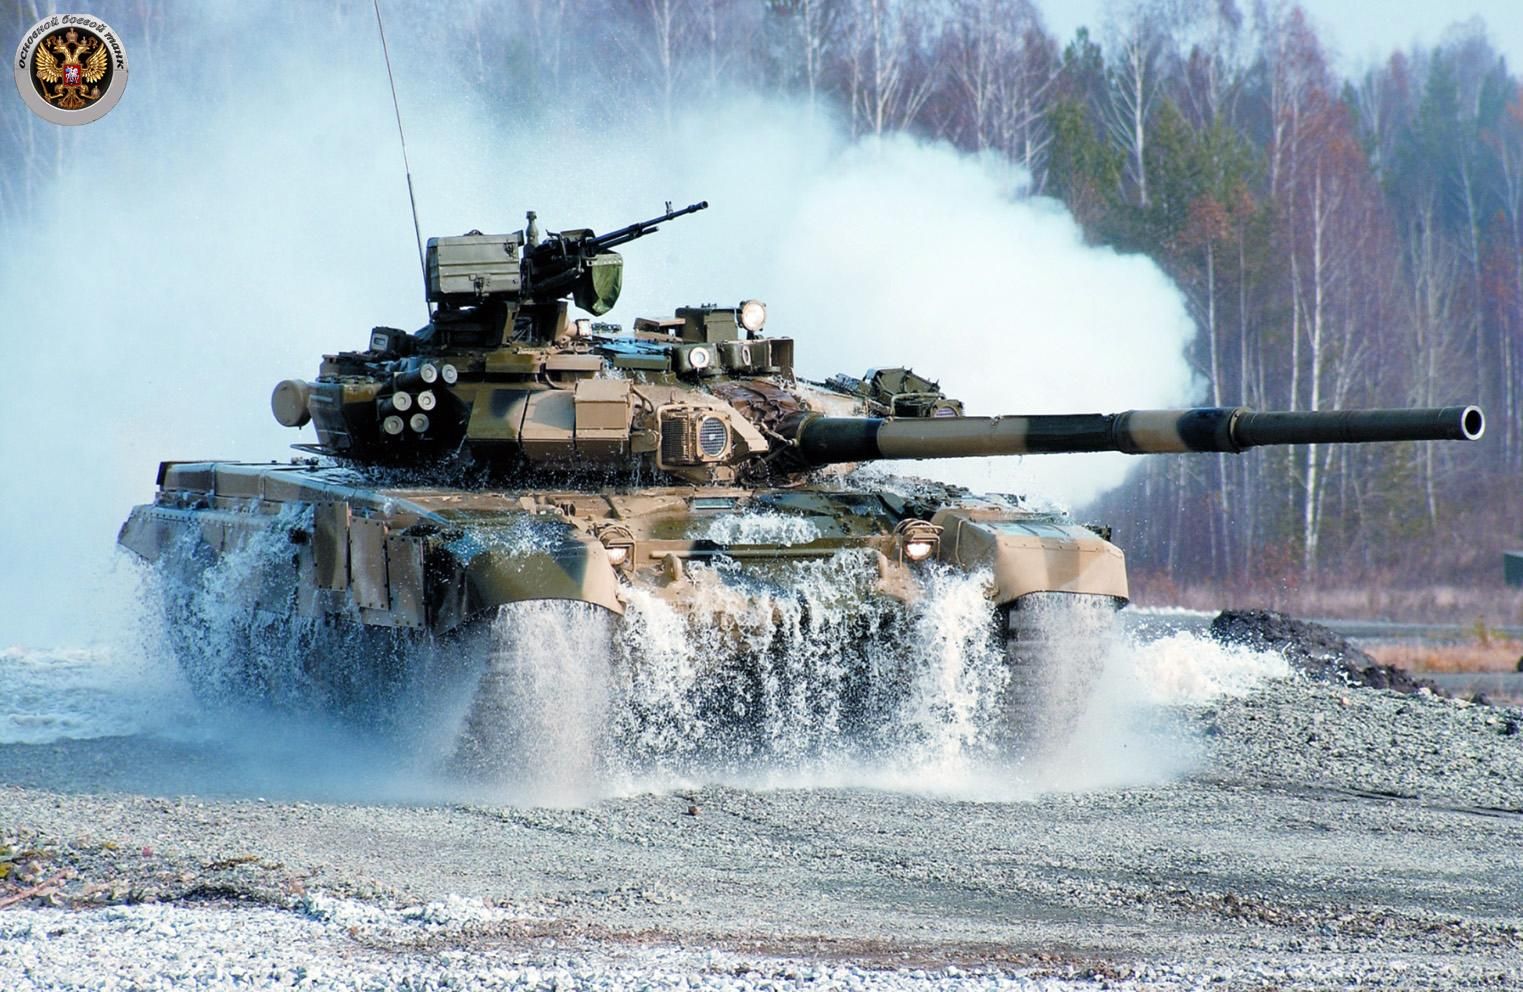 Wallpapers Tanks T-90 Army Image #249546 Download